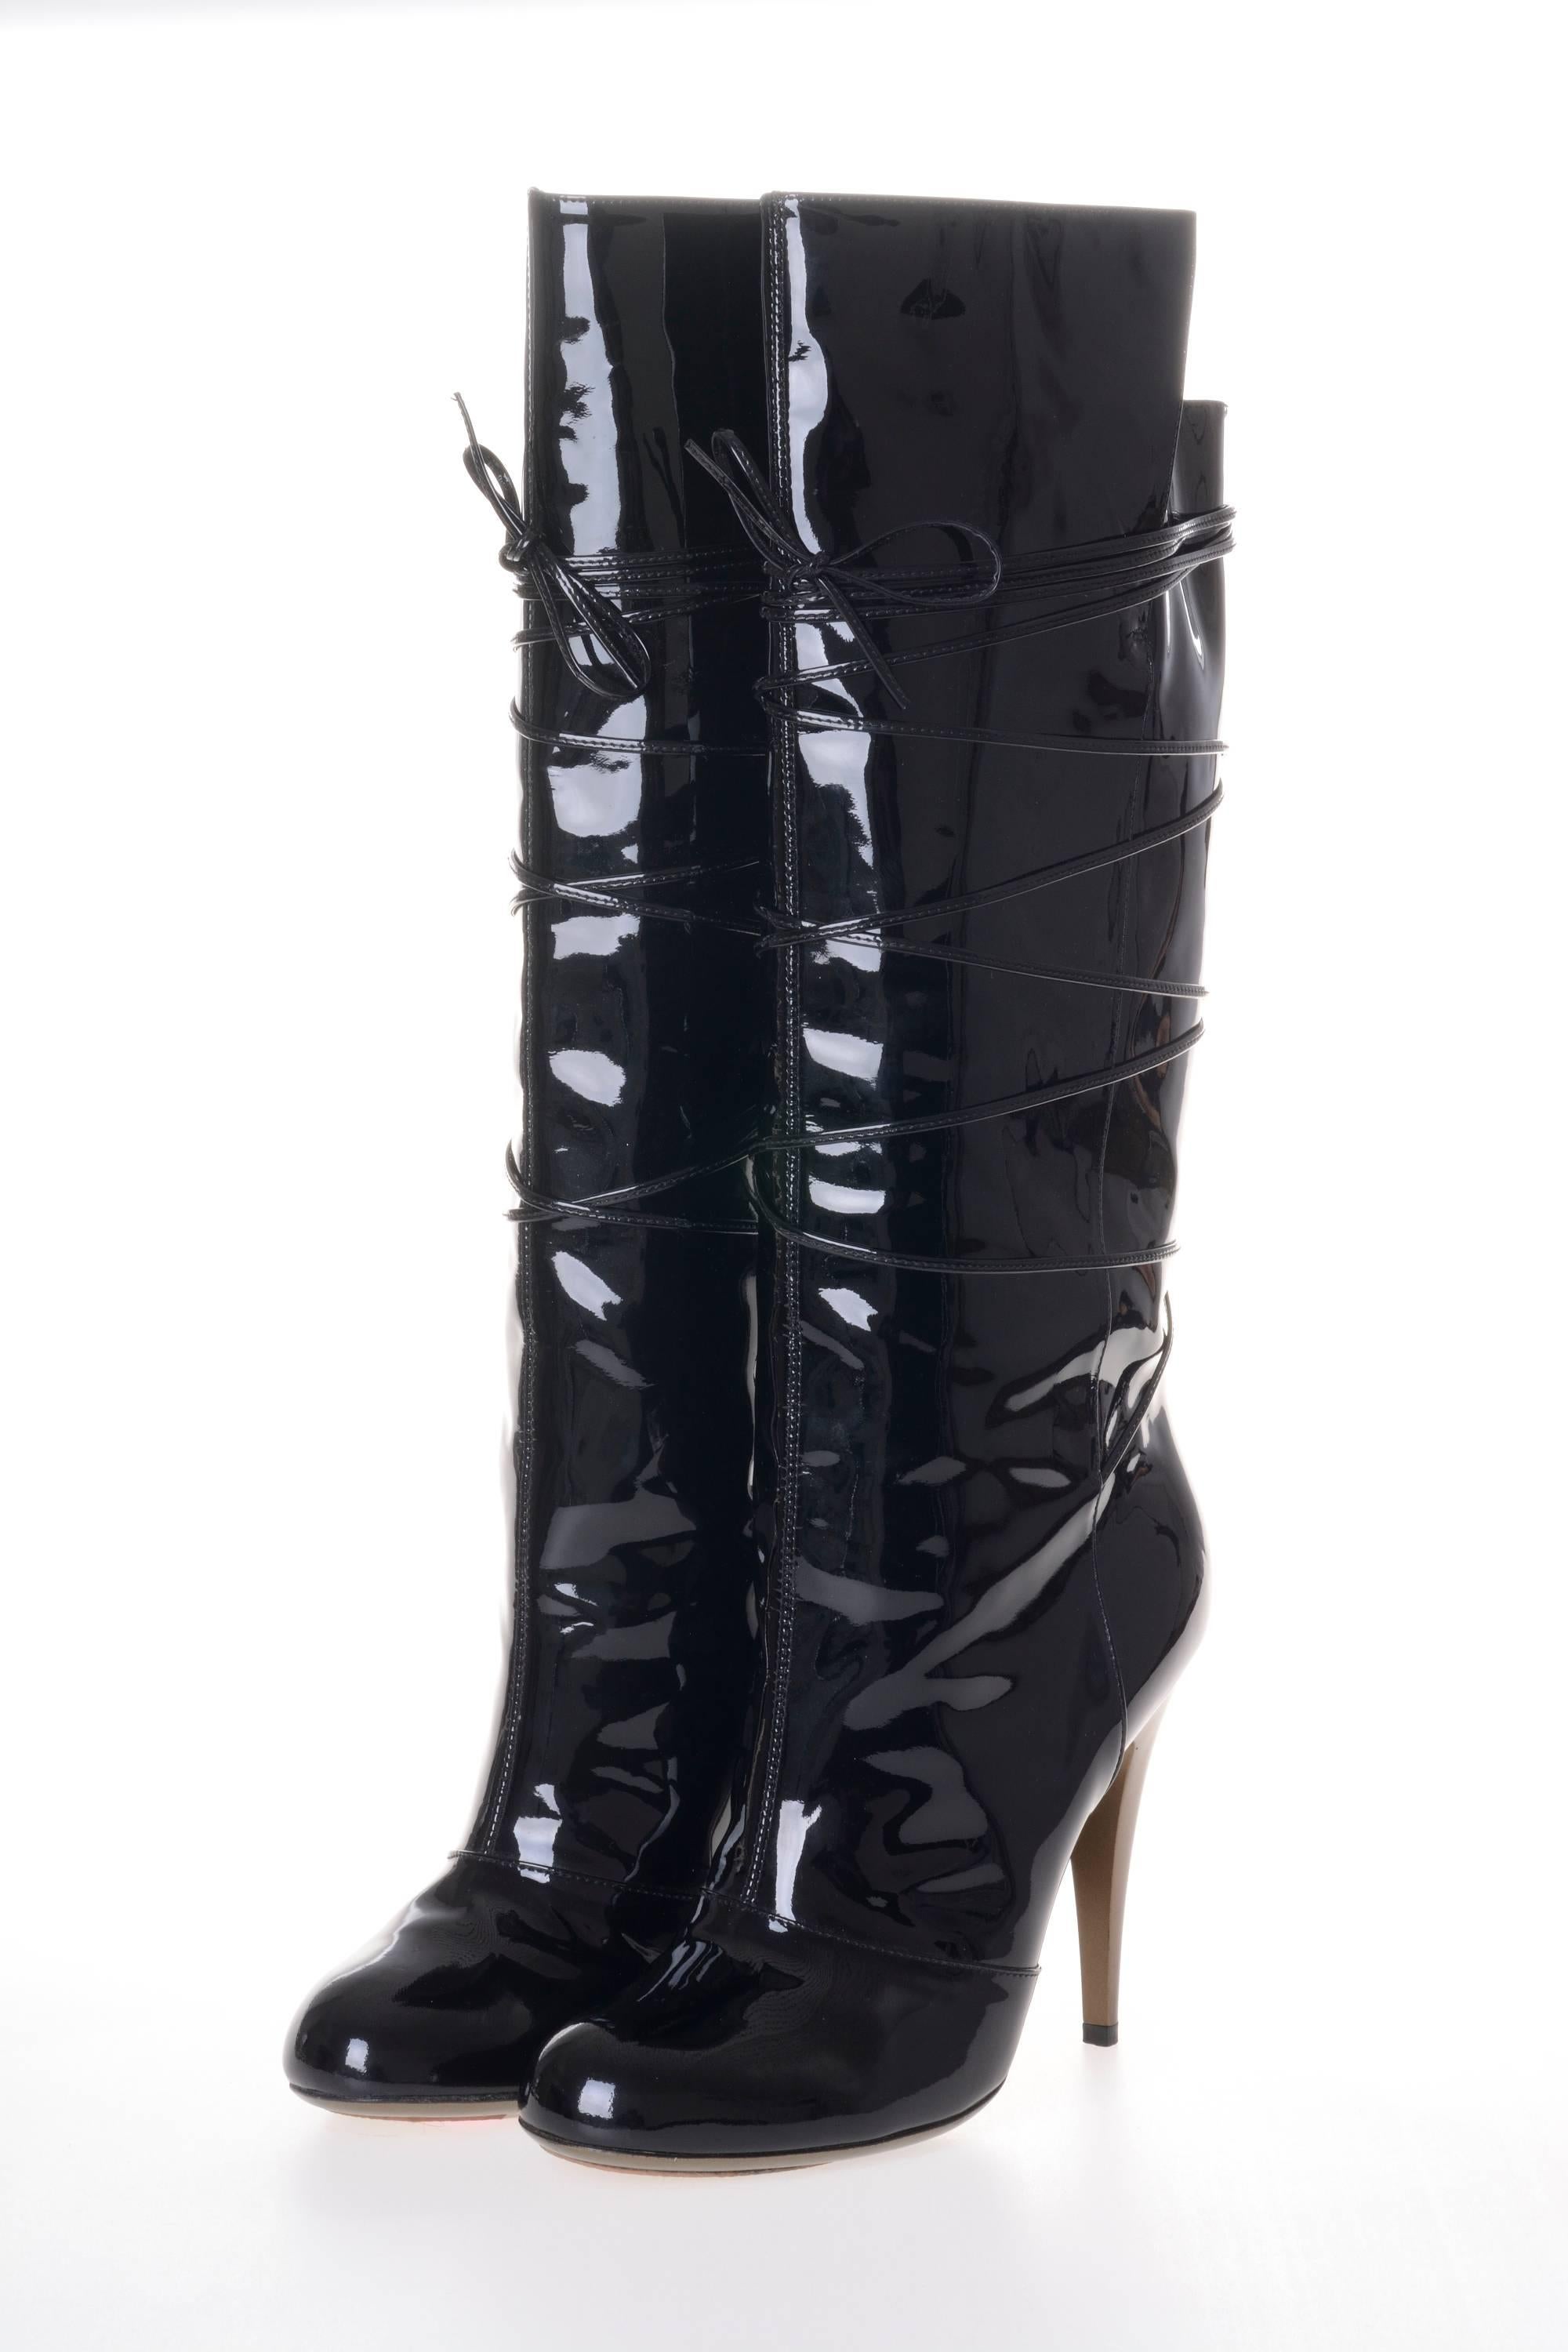 This black patent leather crisscross lace boots by YVES SAINT LAURENT Rive Gauche has a lace cross up the boots from the ankle, almond toe shape, stiletto high heel, fully lined with gold leather, old gold outsole and decorative sewing on each